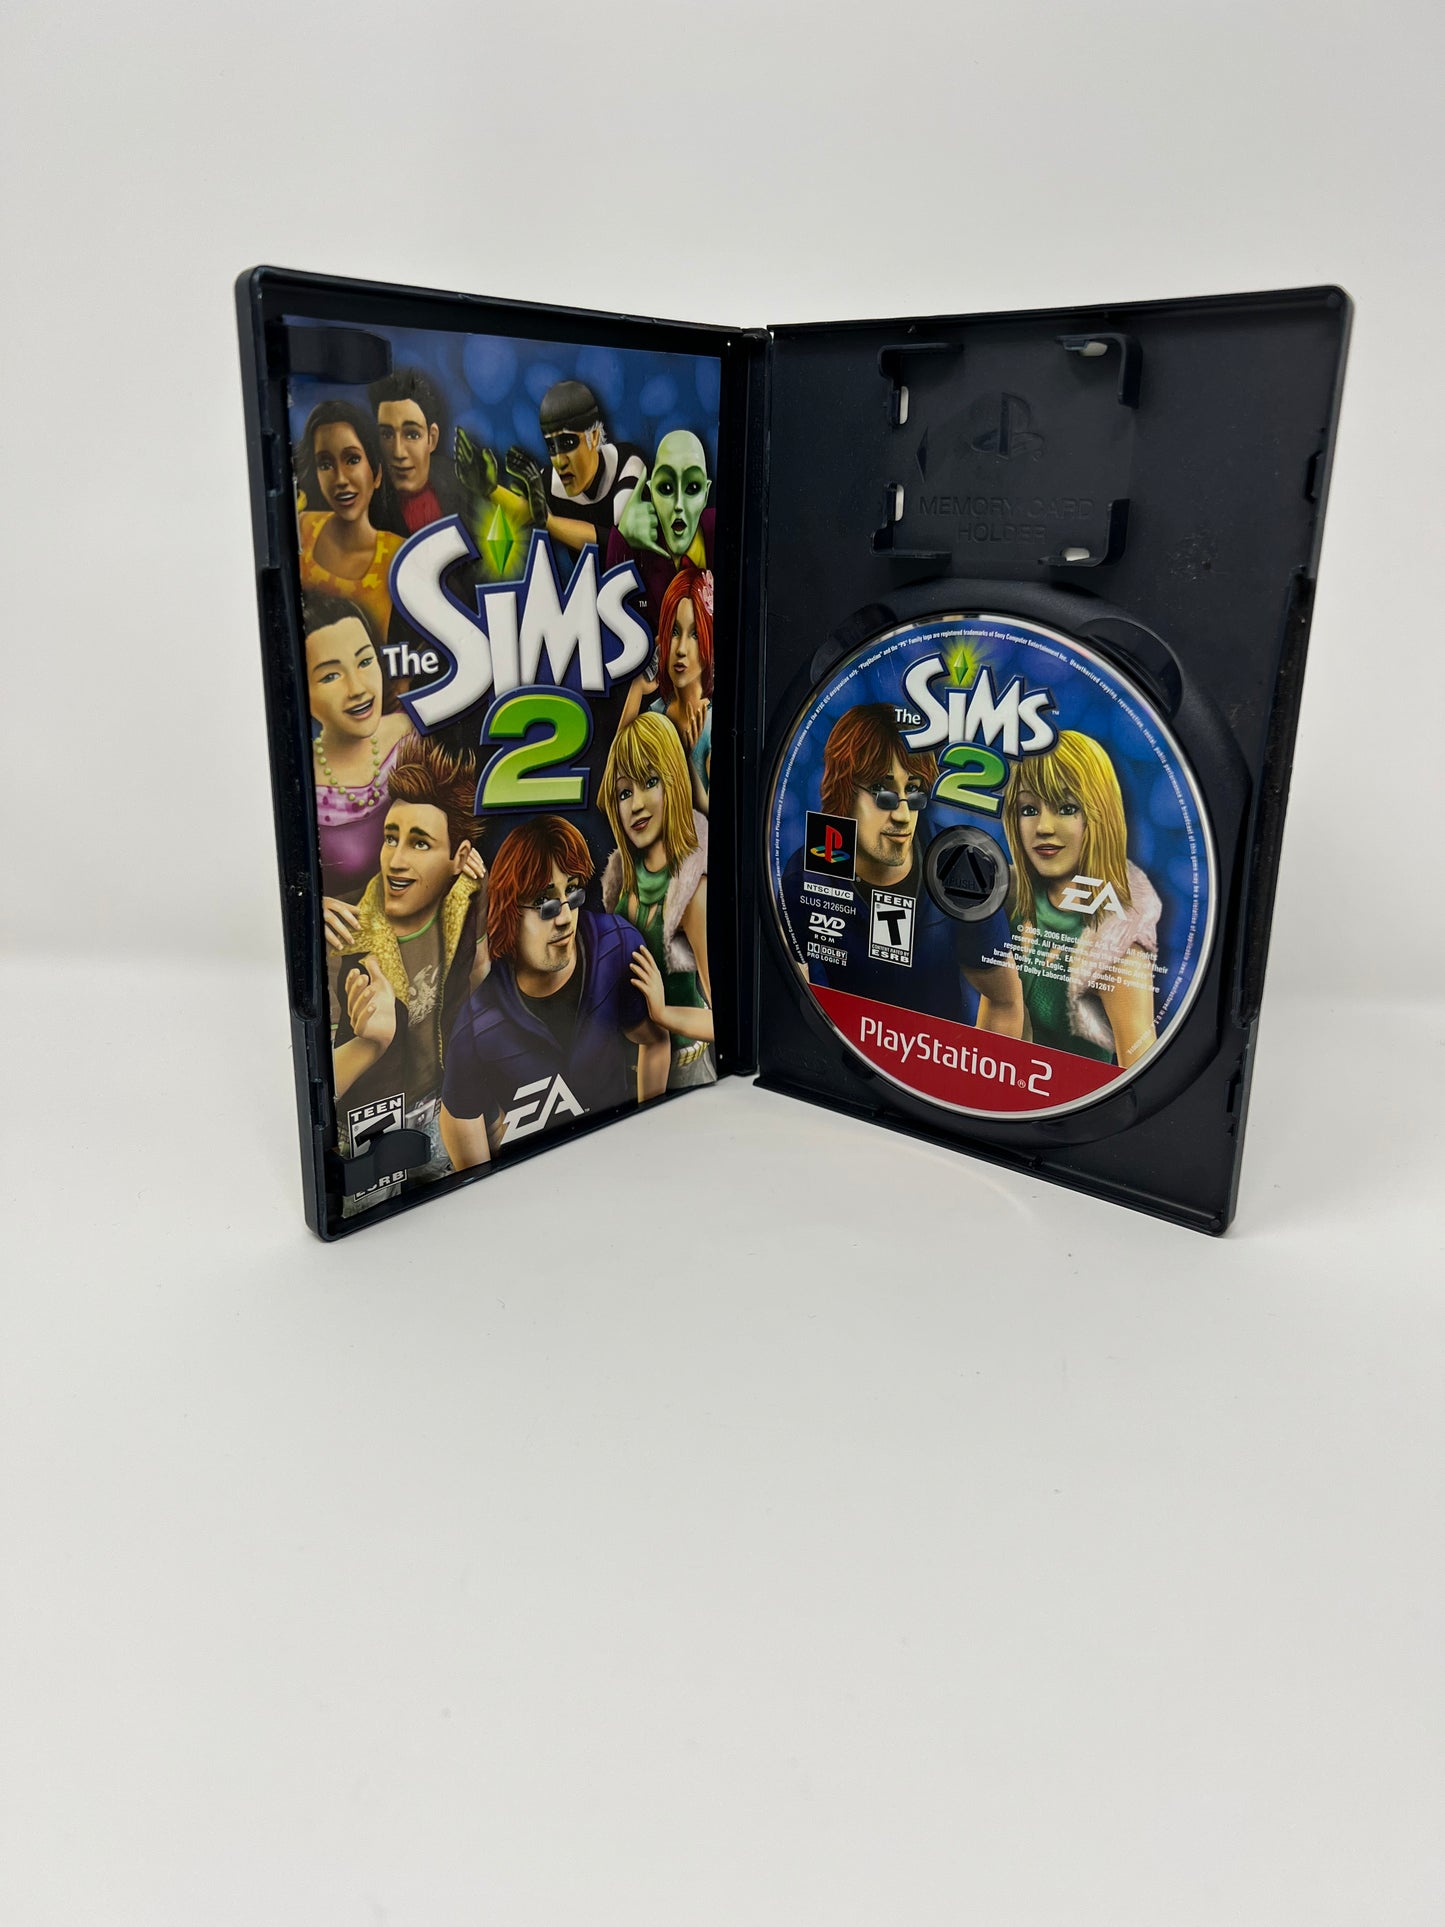 The Sims 2 - PS2 Game - Used